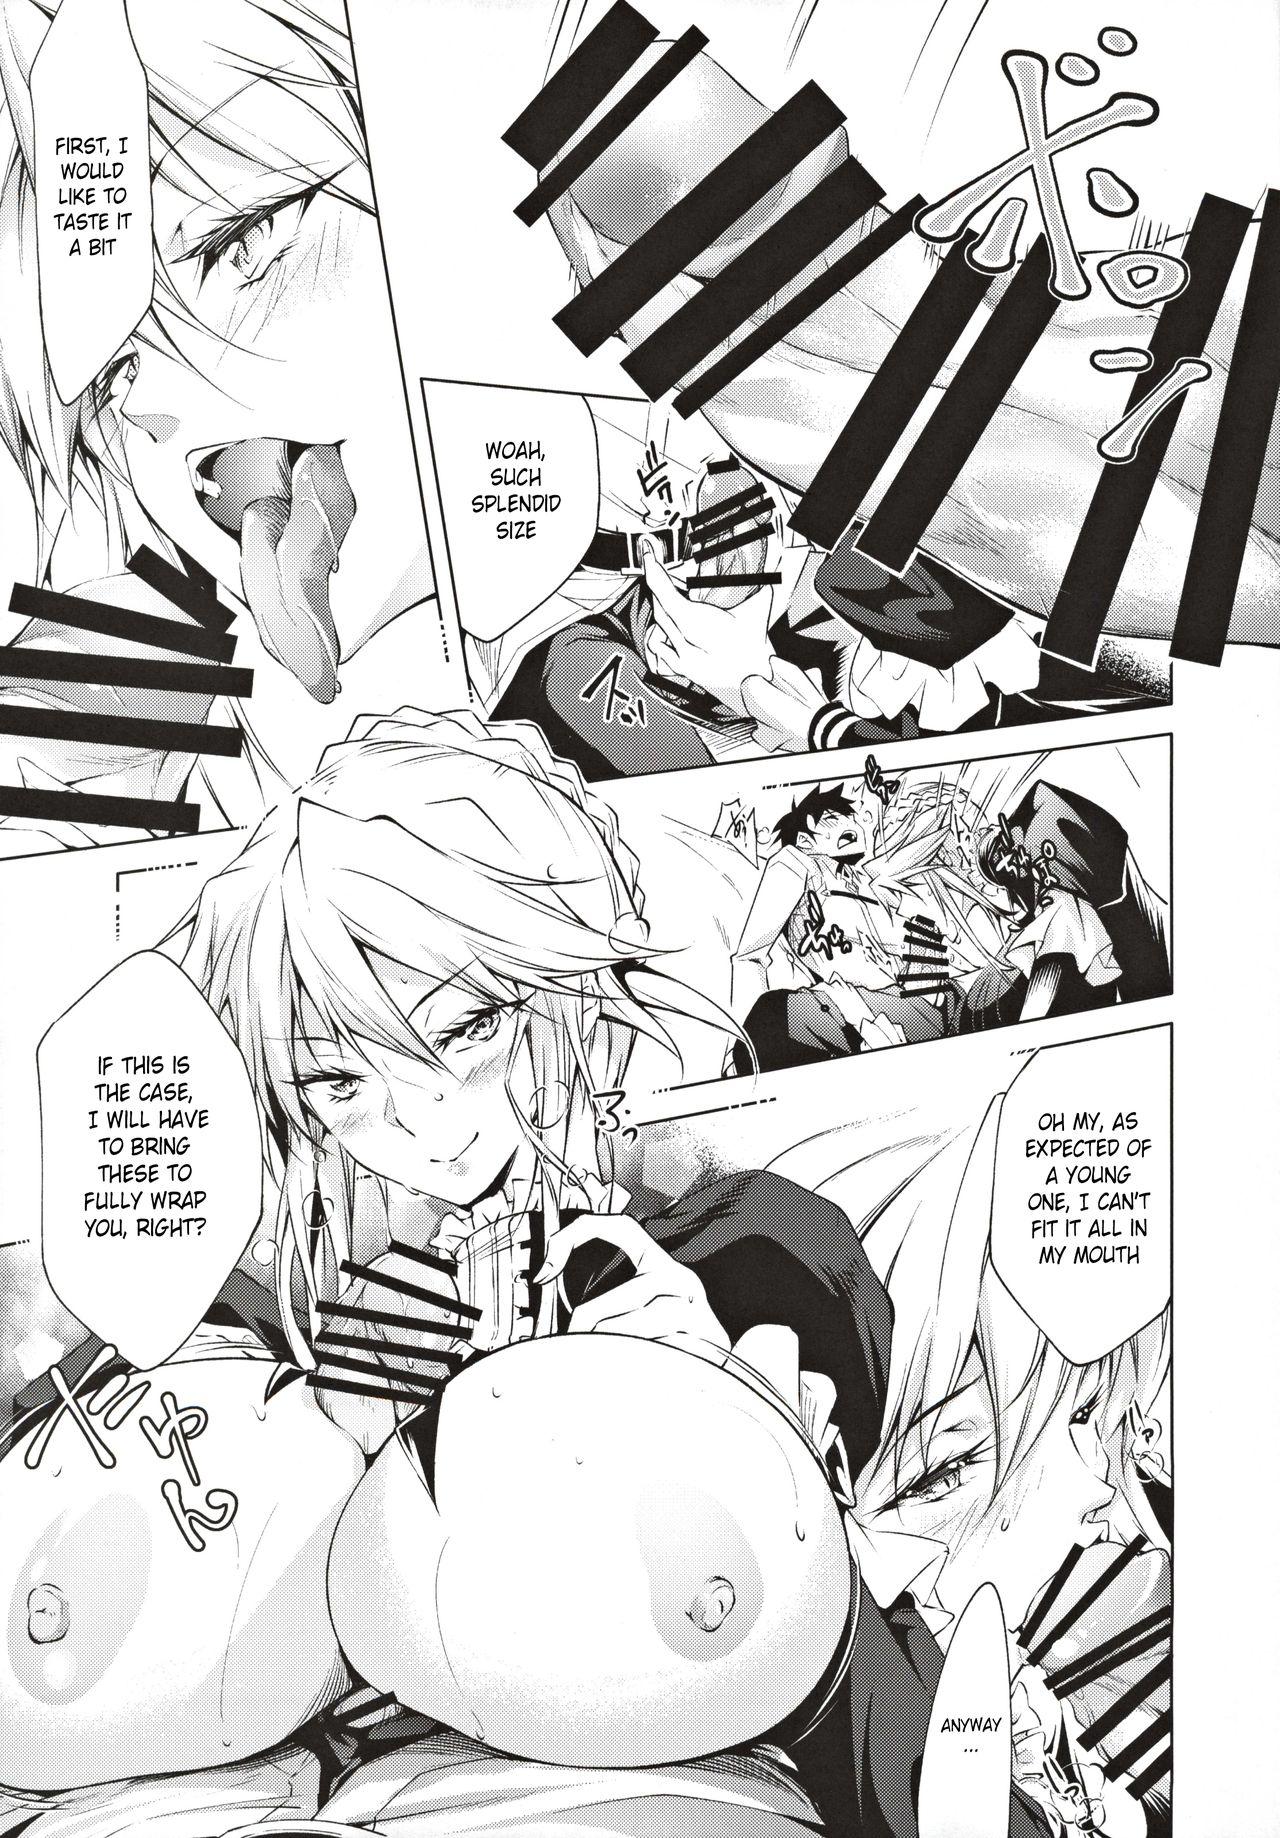 Asiansex Pendra Shimai no Seijijou | The Pendragon twin sisters' sexual situation - Fate grand order Realsex - Page 8